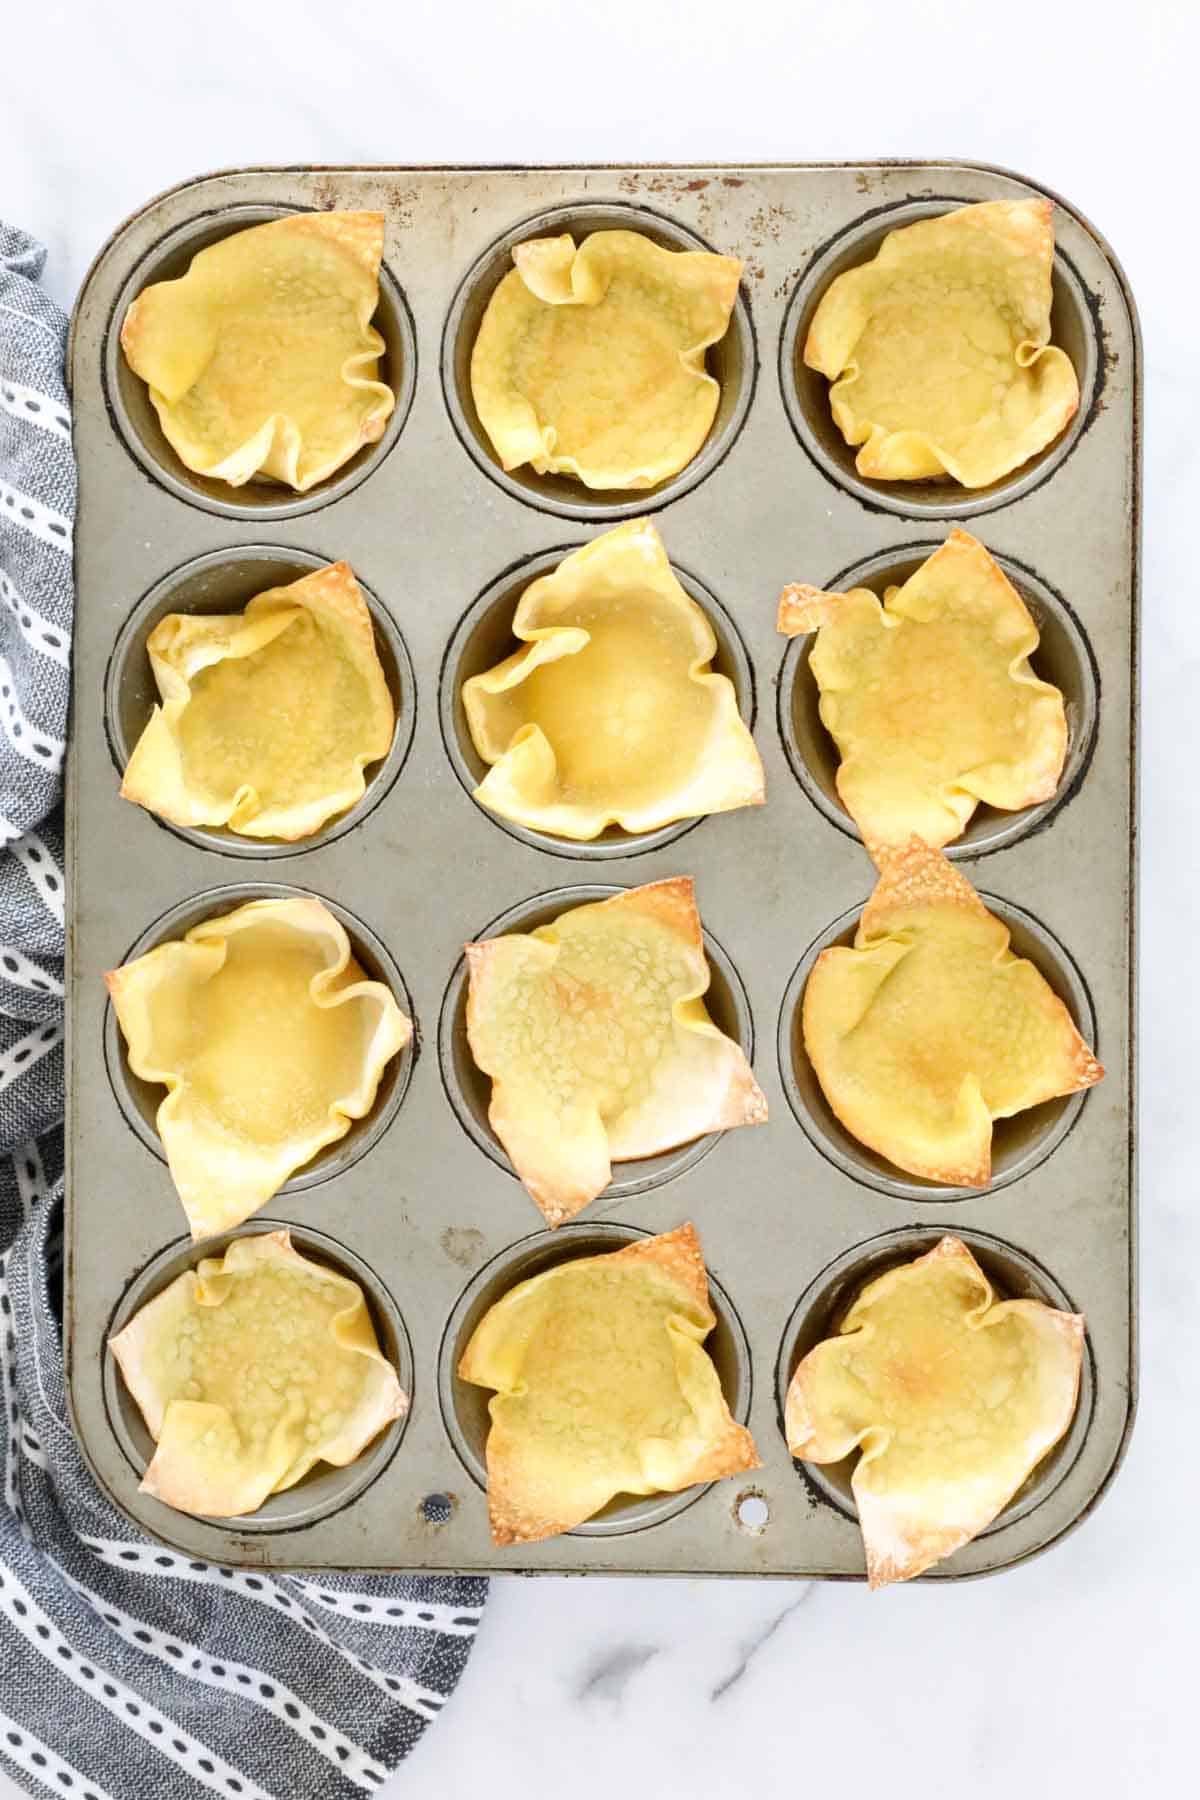 Wonton wrappers baked in a muffin tin.